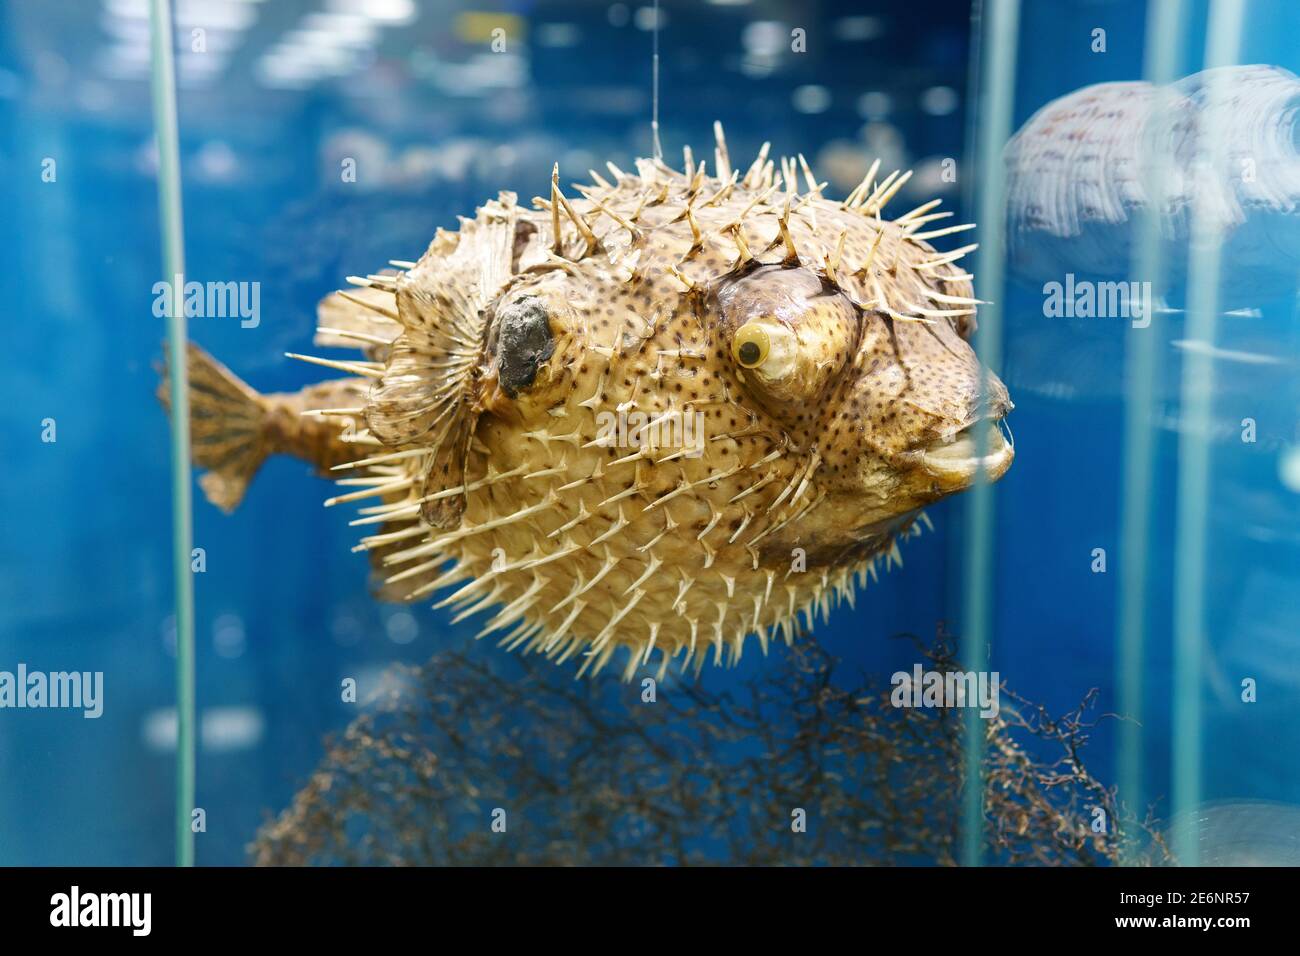 Dried and preserved antique puffer fish tetraodontidae specimen. selective focus Stock Photo